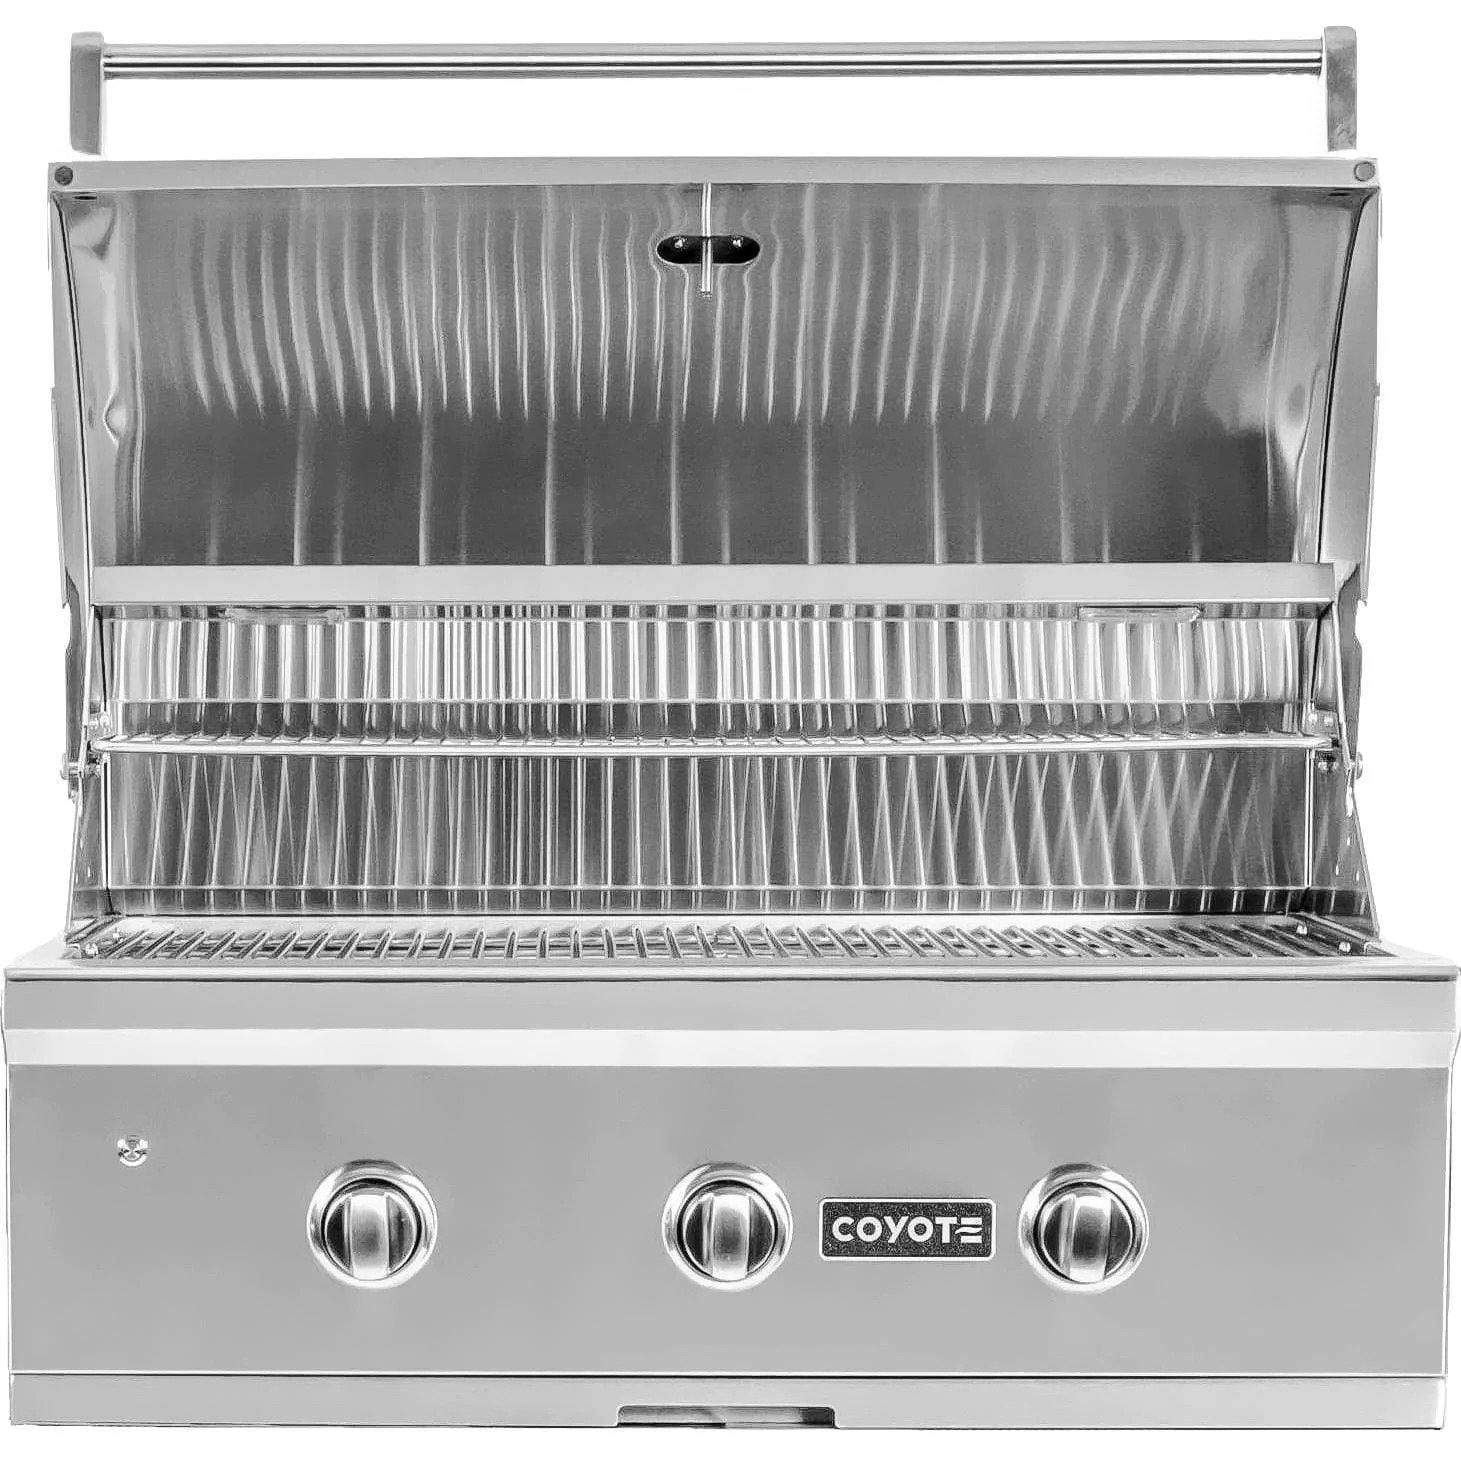 Coyote Affordable Premium Grill Coyote C-Series 34-Inch 3-Burner Free Standing - Natural Gas OR Propane Gas Grill - [C2C34LP] [C2C34NG]